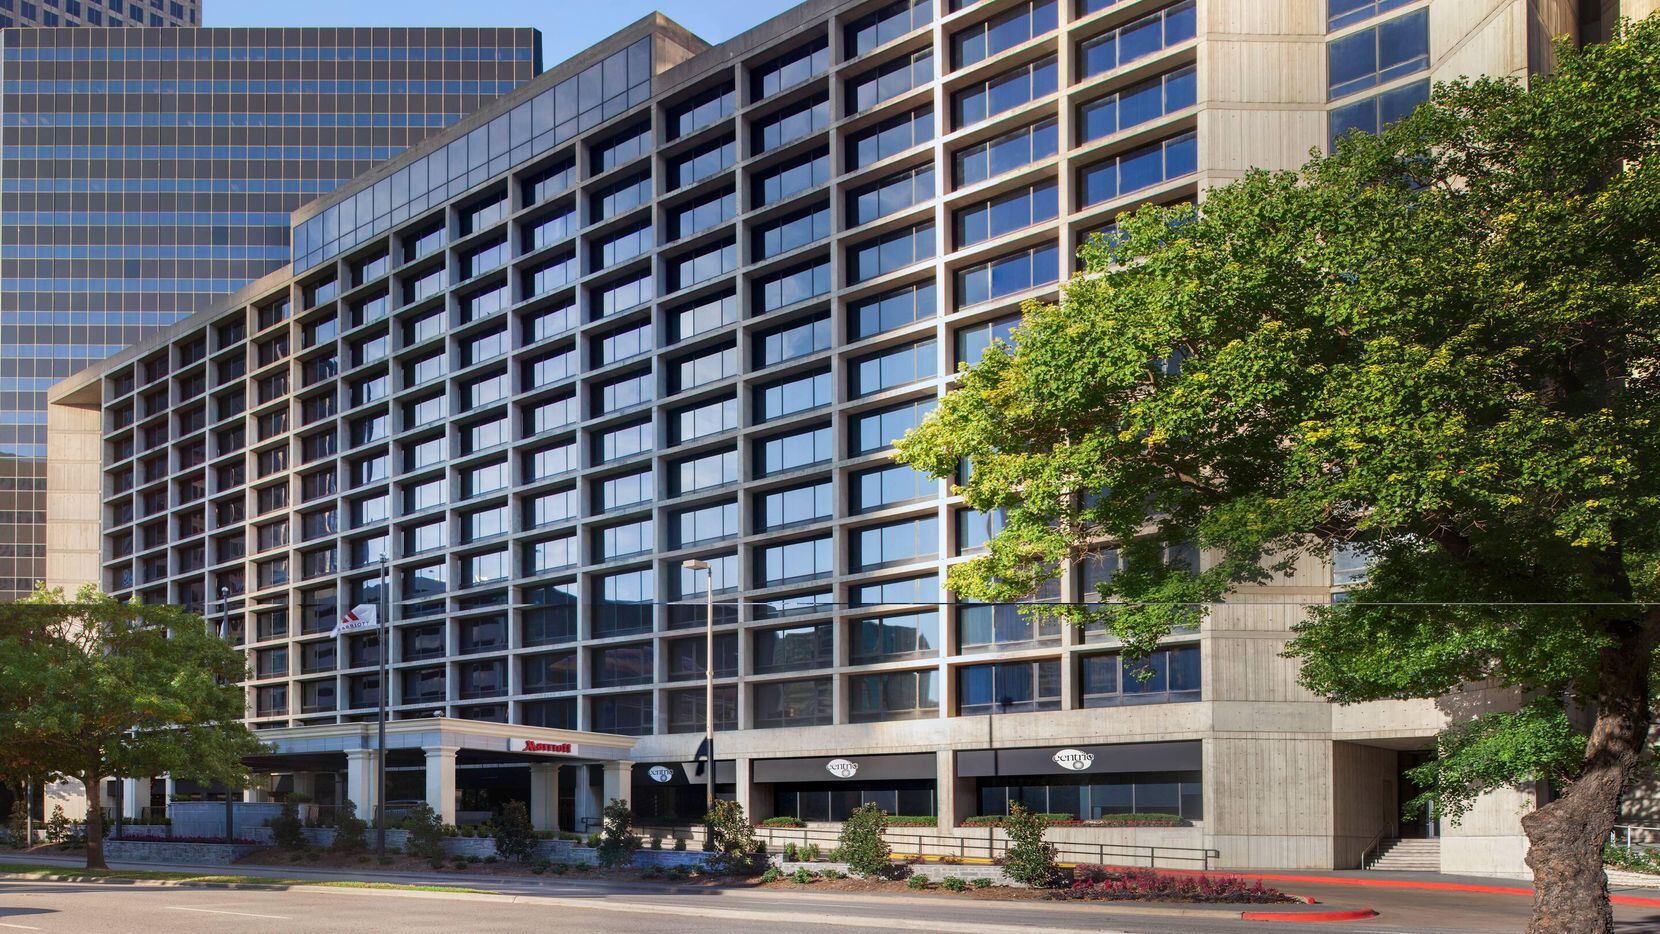 The Marriott Downtown Dallas opened in the 1980s as part of the Plaza of the Americas complex on Pearl Street.